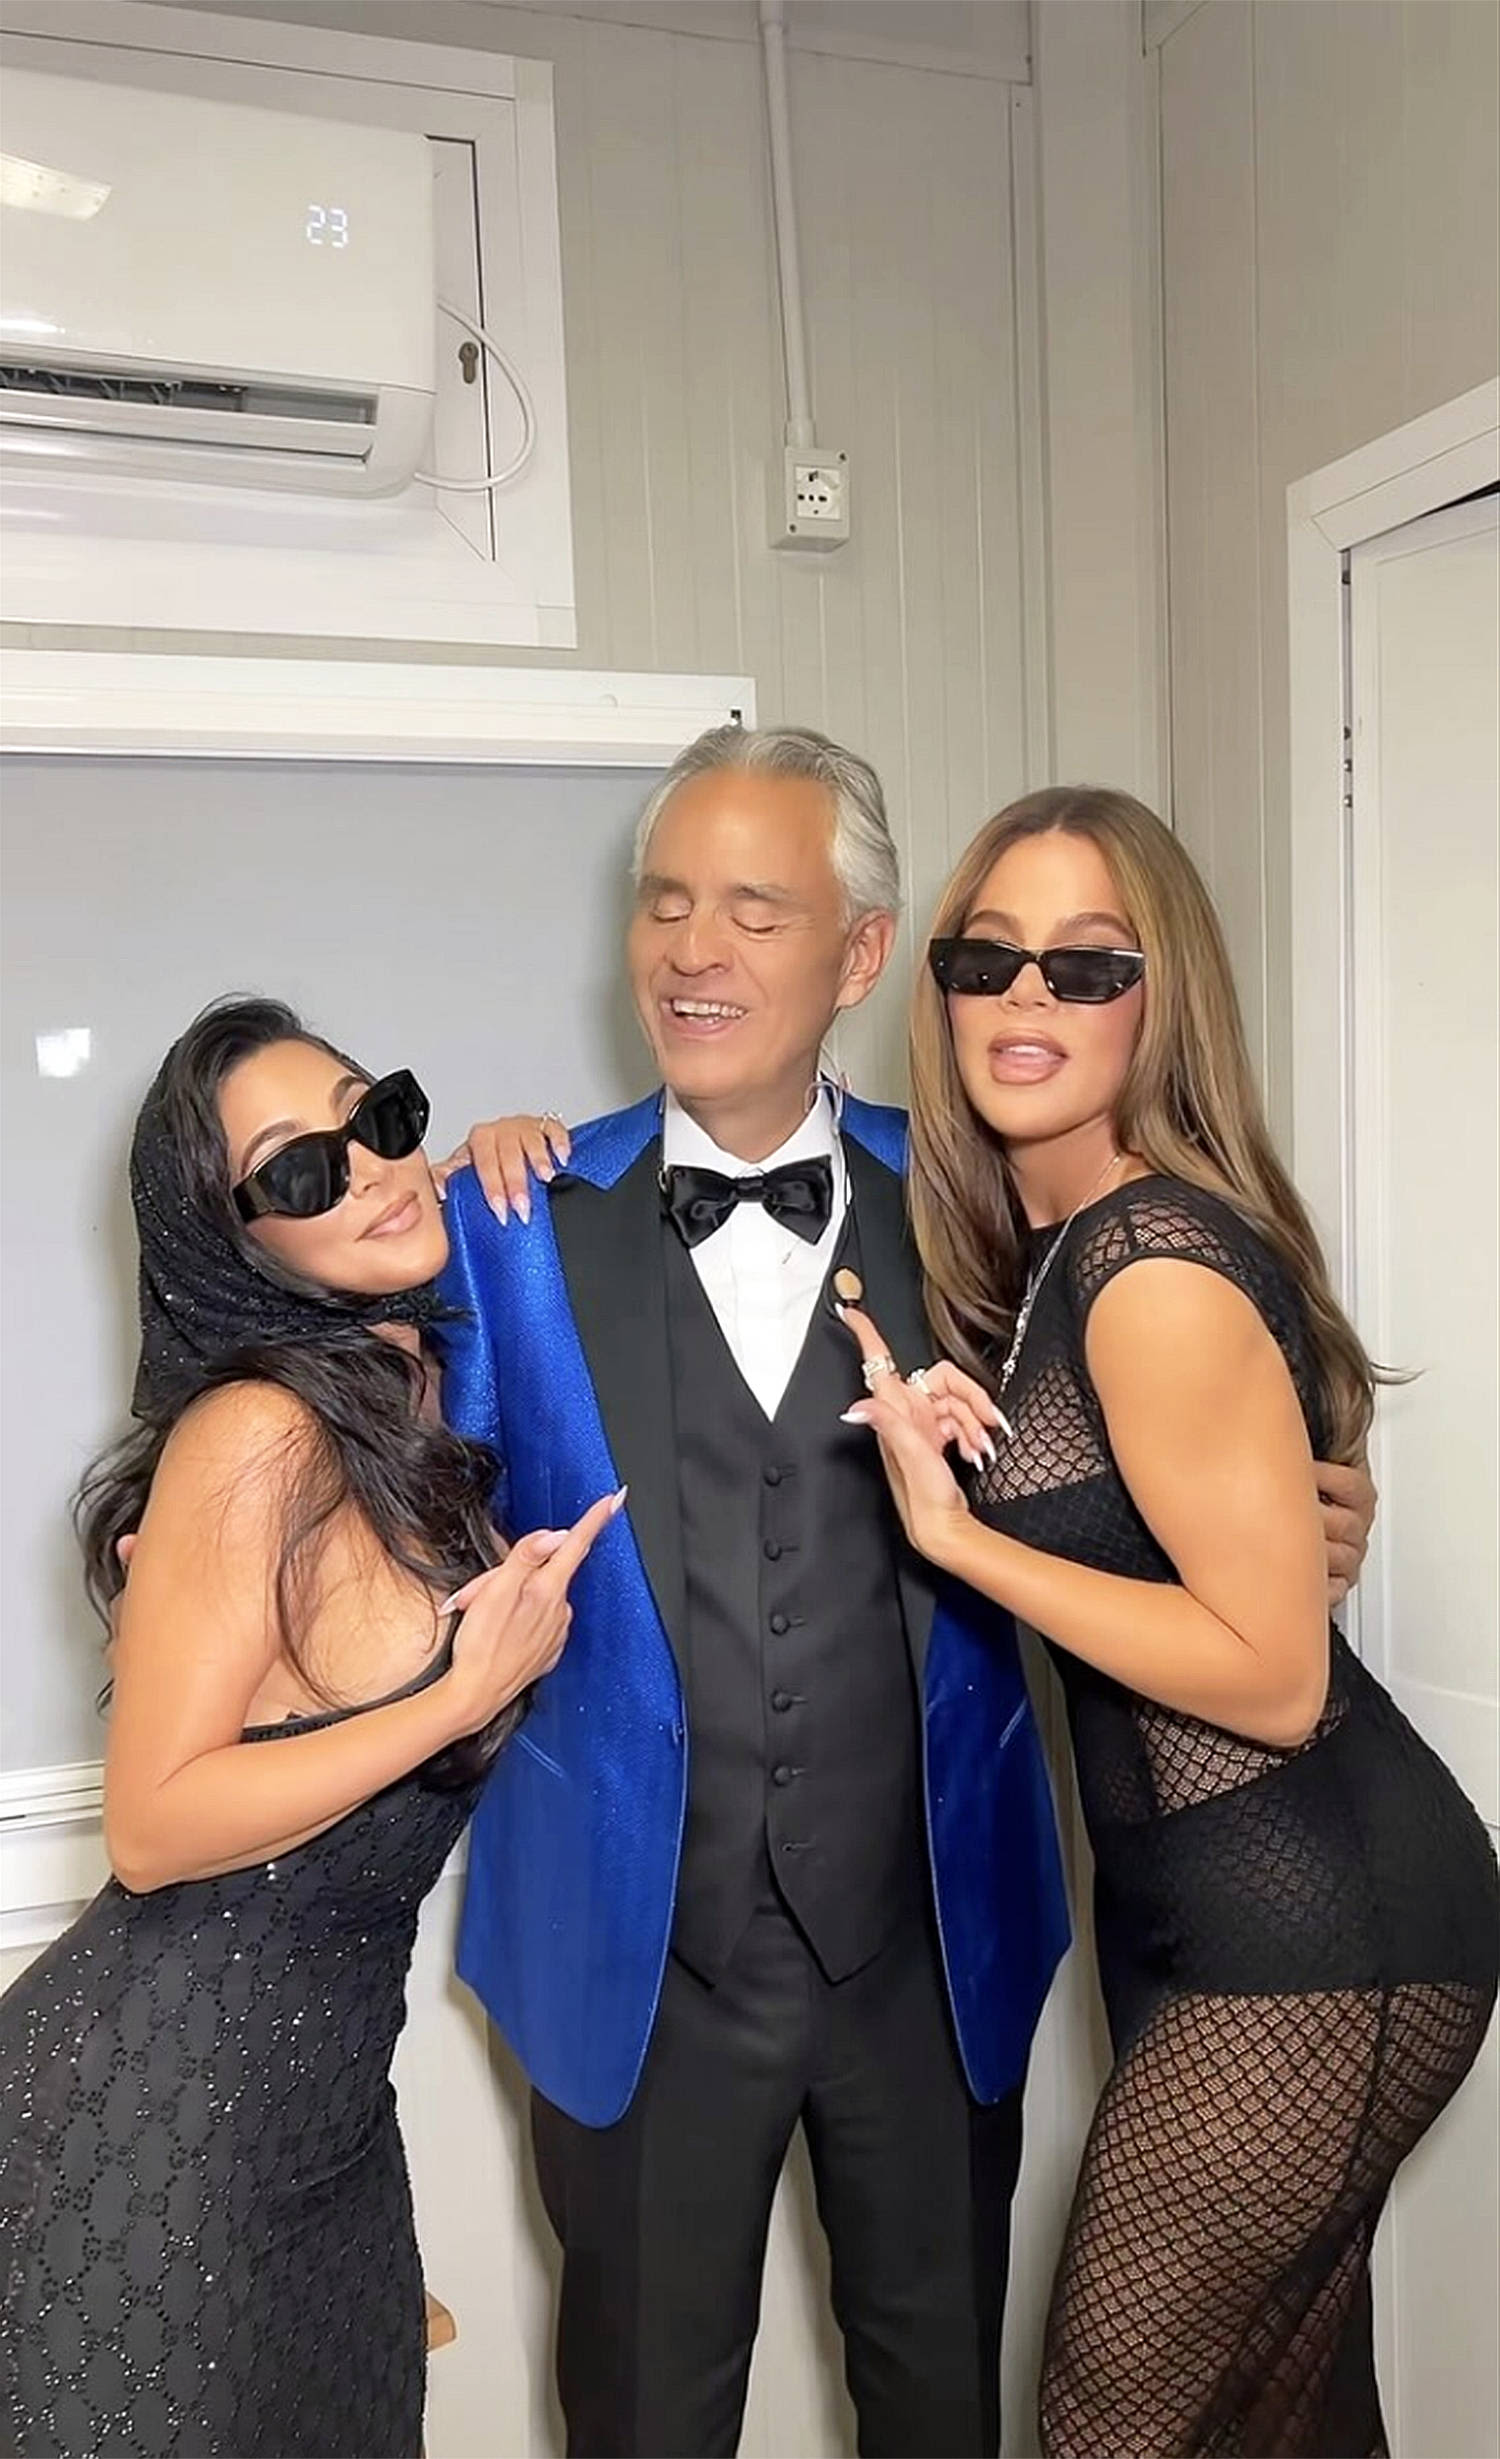 Kim and Khloé Kardashian enlist Andrea Bocelli in video re-creating one of their family feuds